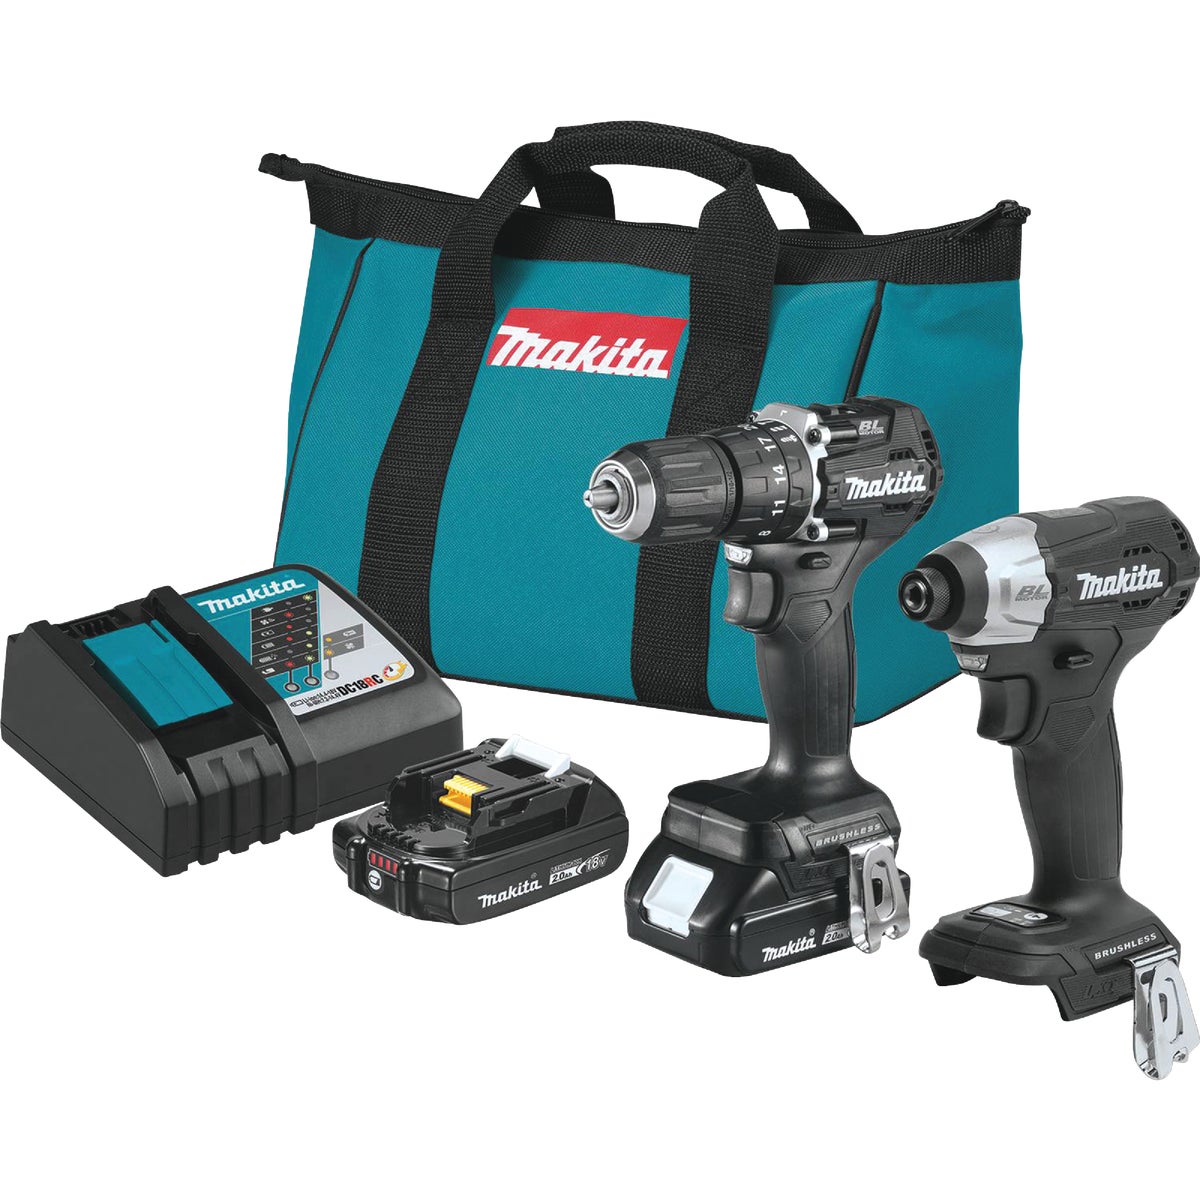 Makita 2-Tool 18 Volt LXT Lithium-Ion Brushless Sub-Compact Hammer Drill/Driver & Impact Driver Cordless Tool Combo Kit